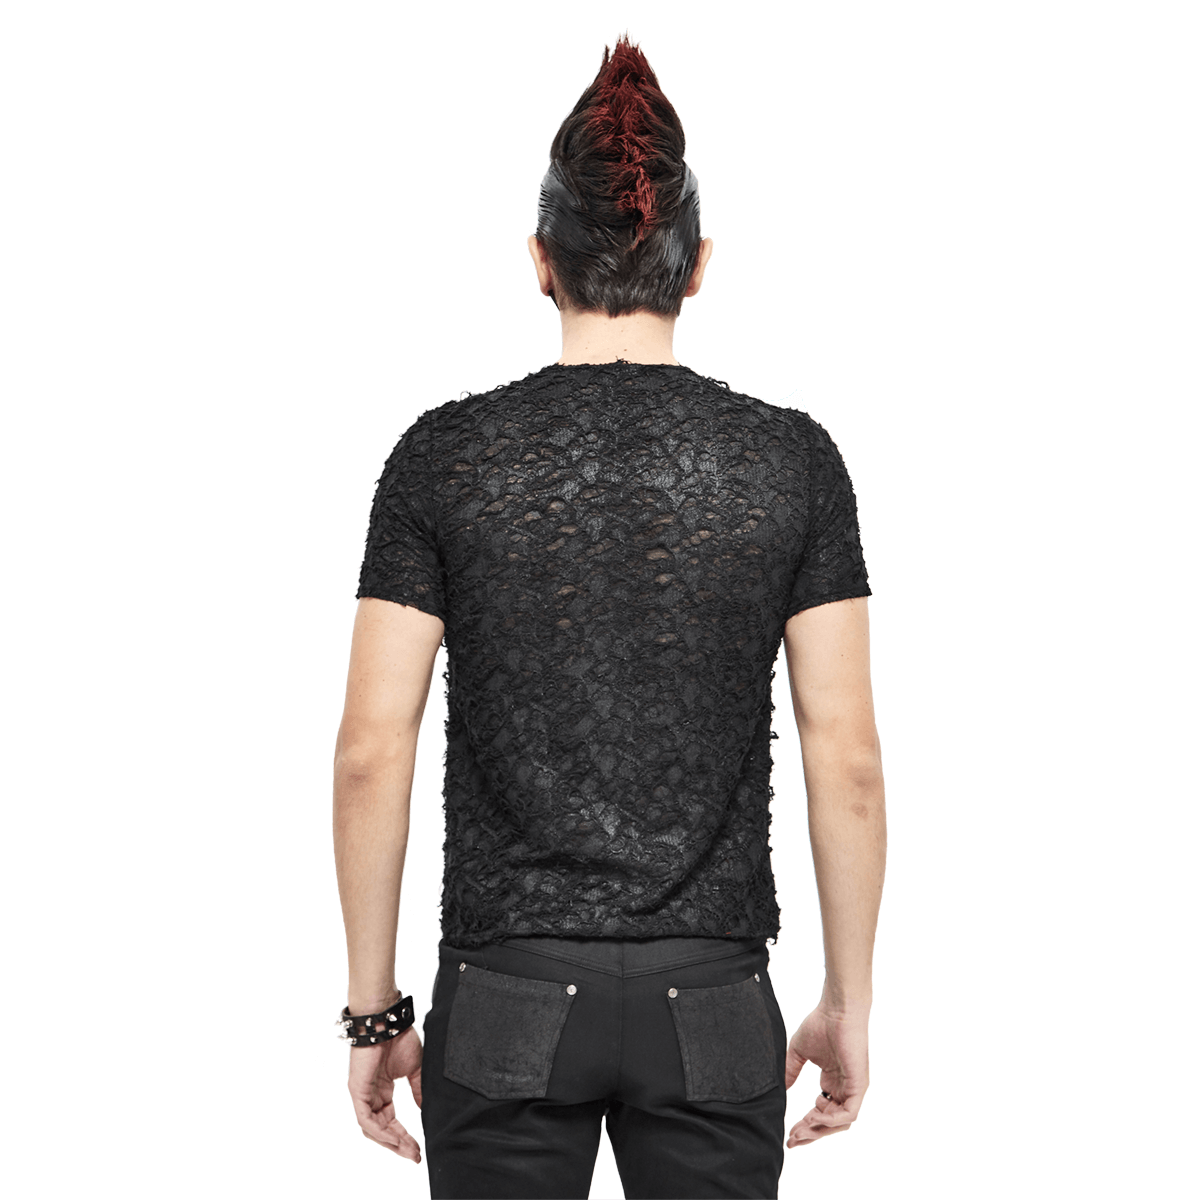 Black Gothic Men's Slim fit T-Shirt / Motorcycle Punk T-shirt with Lace-Up On Neckline & Bust - HARD'N'HEAVY